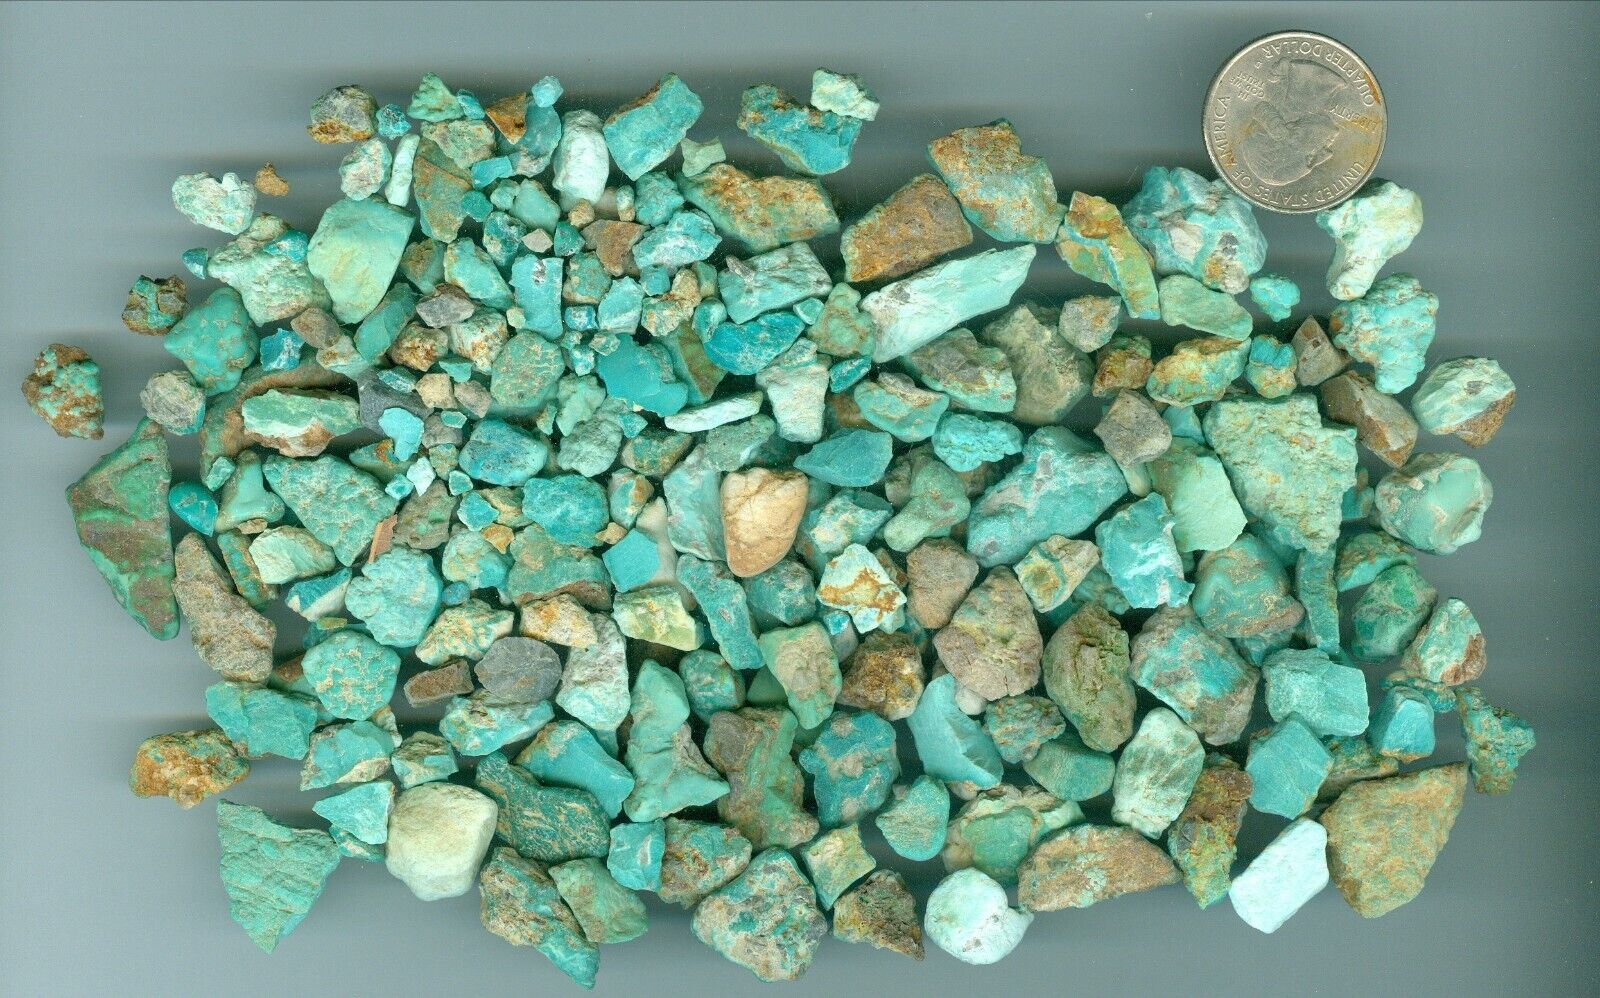 Turquoise Rough 236 grams of Natural American Turquoise Fox Mine Cutting rough